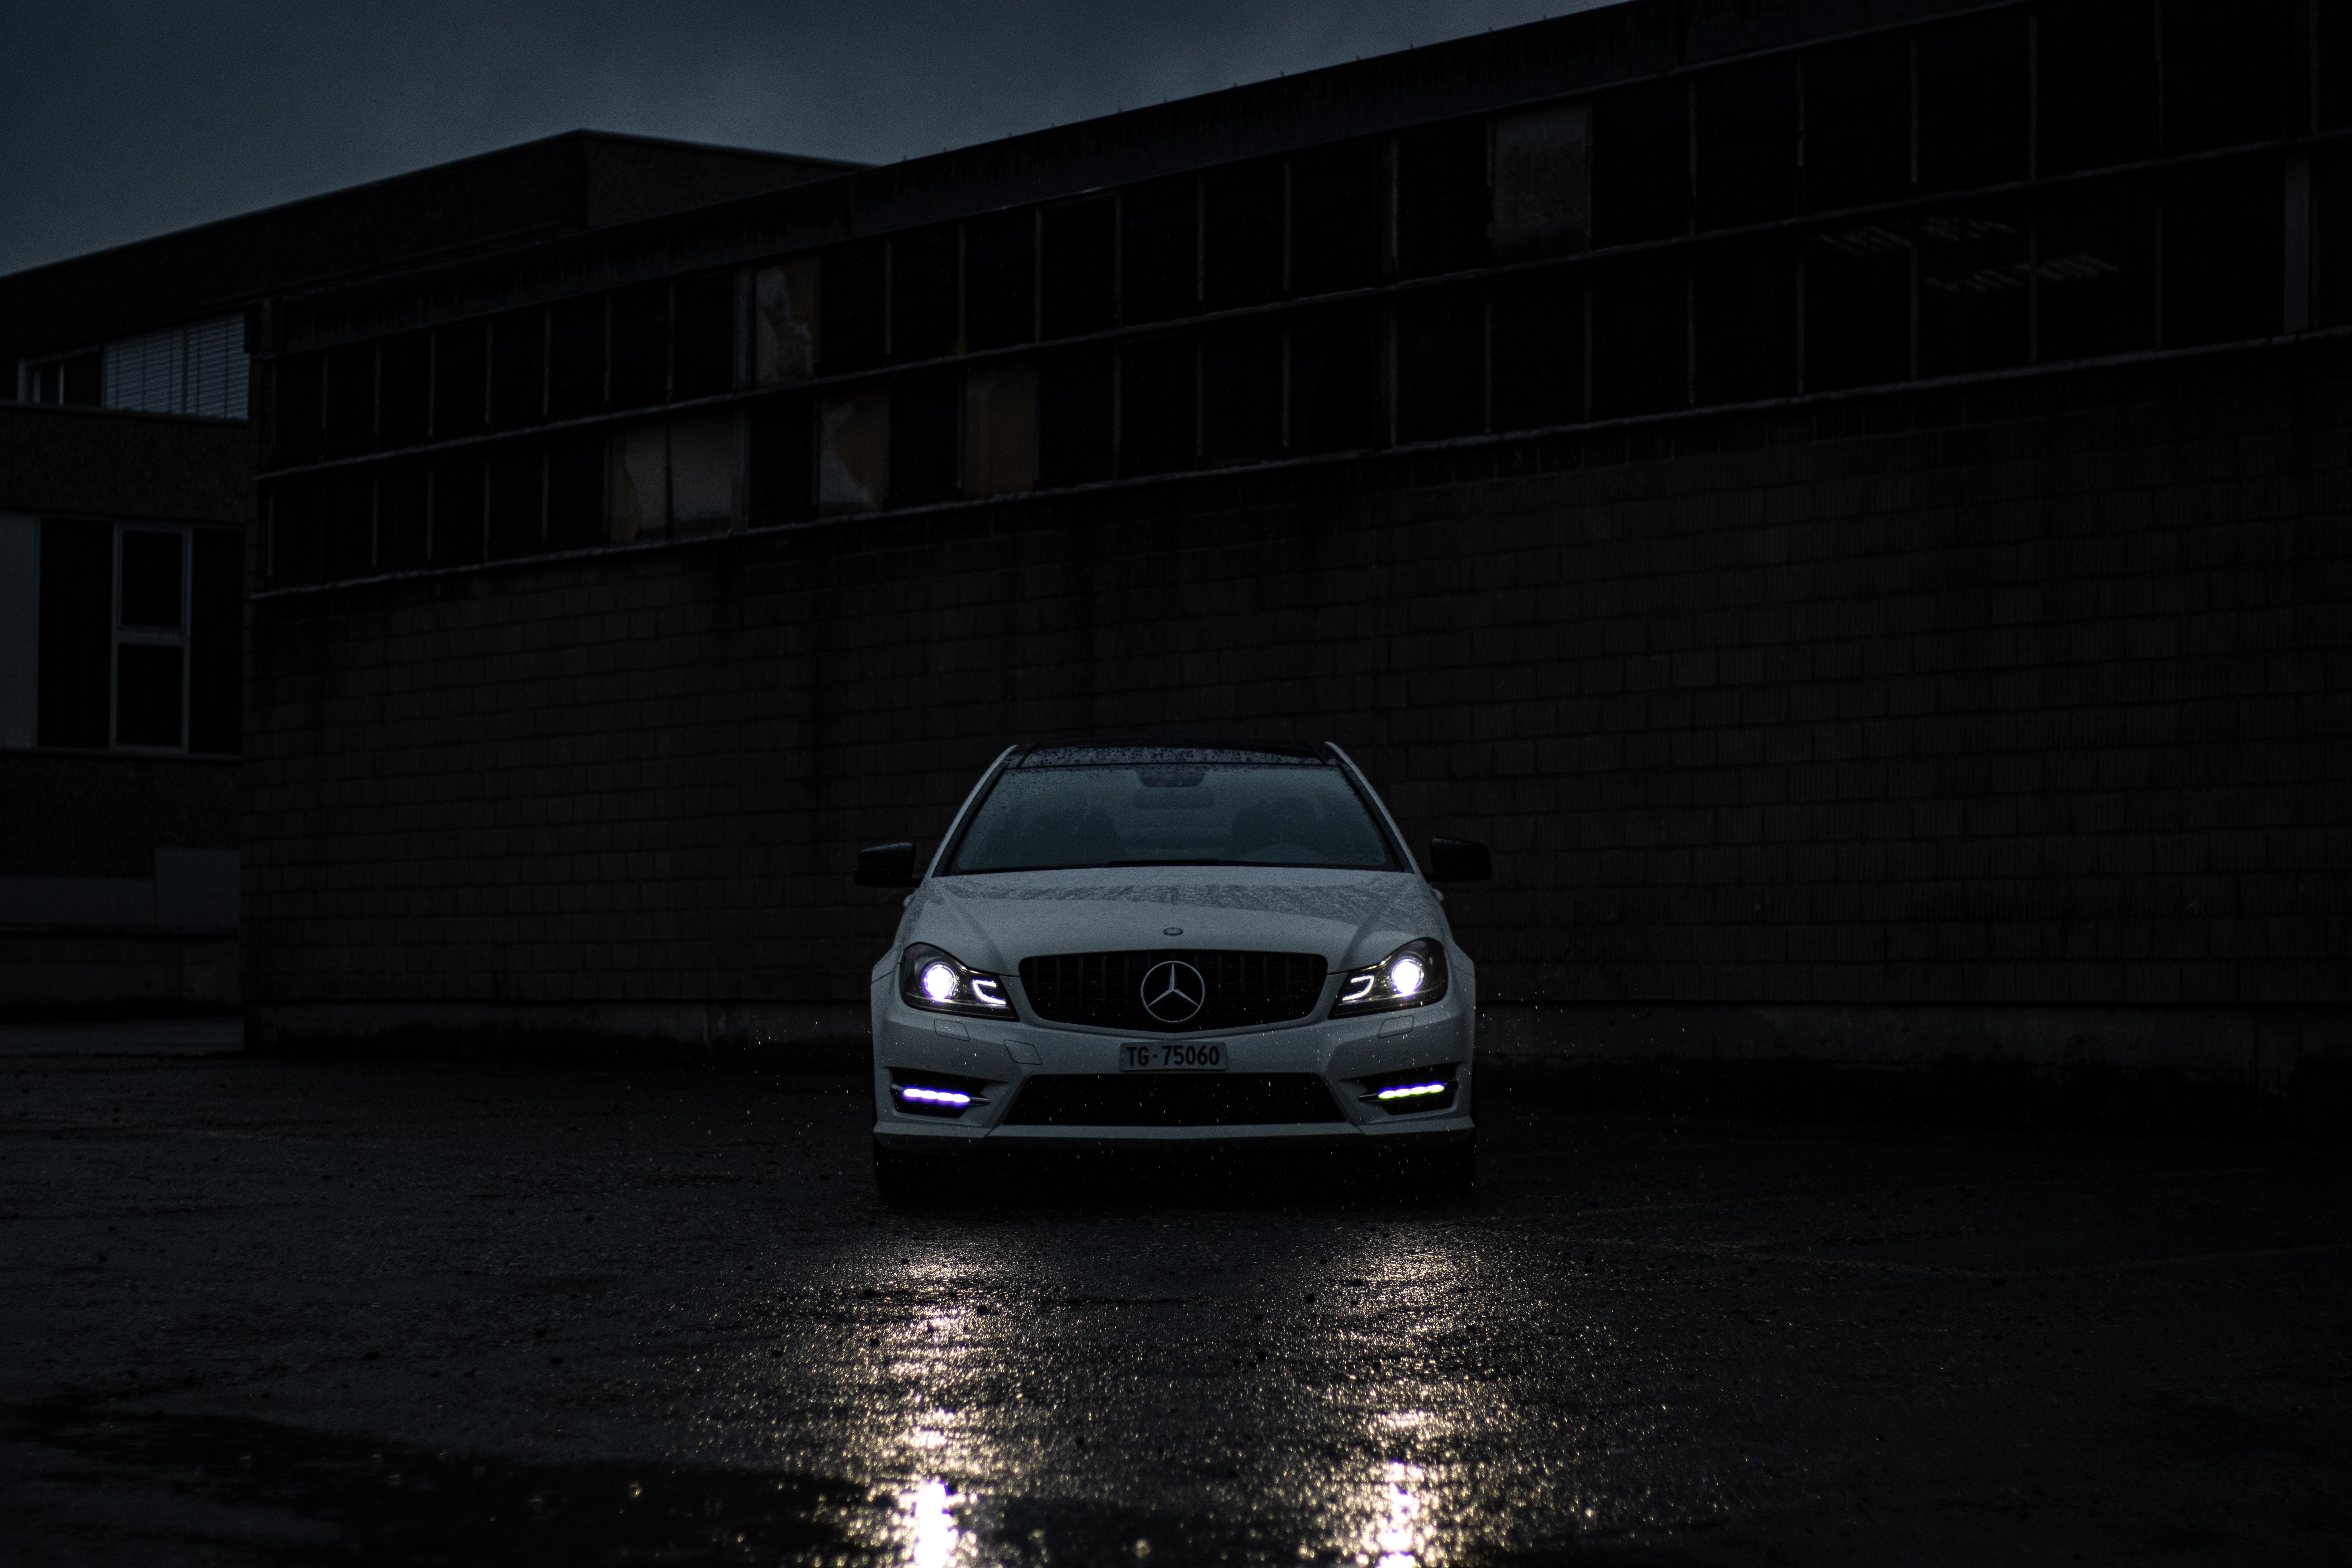 mercedes benz, headlights, cars, front view, white, lights, car cellphone